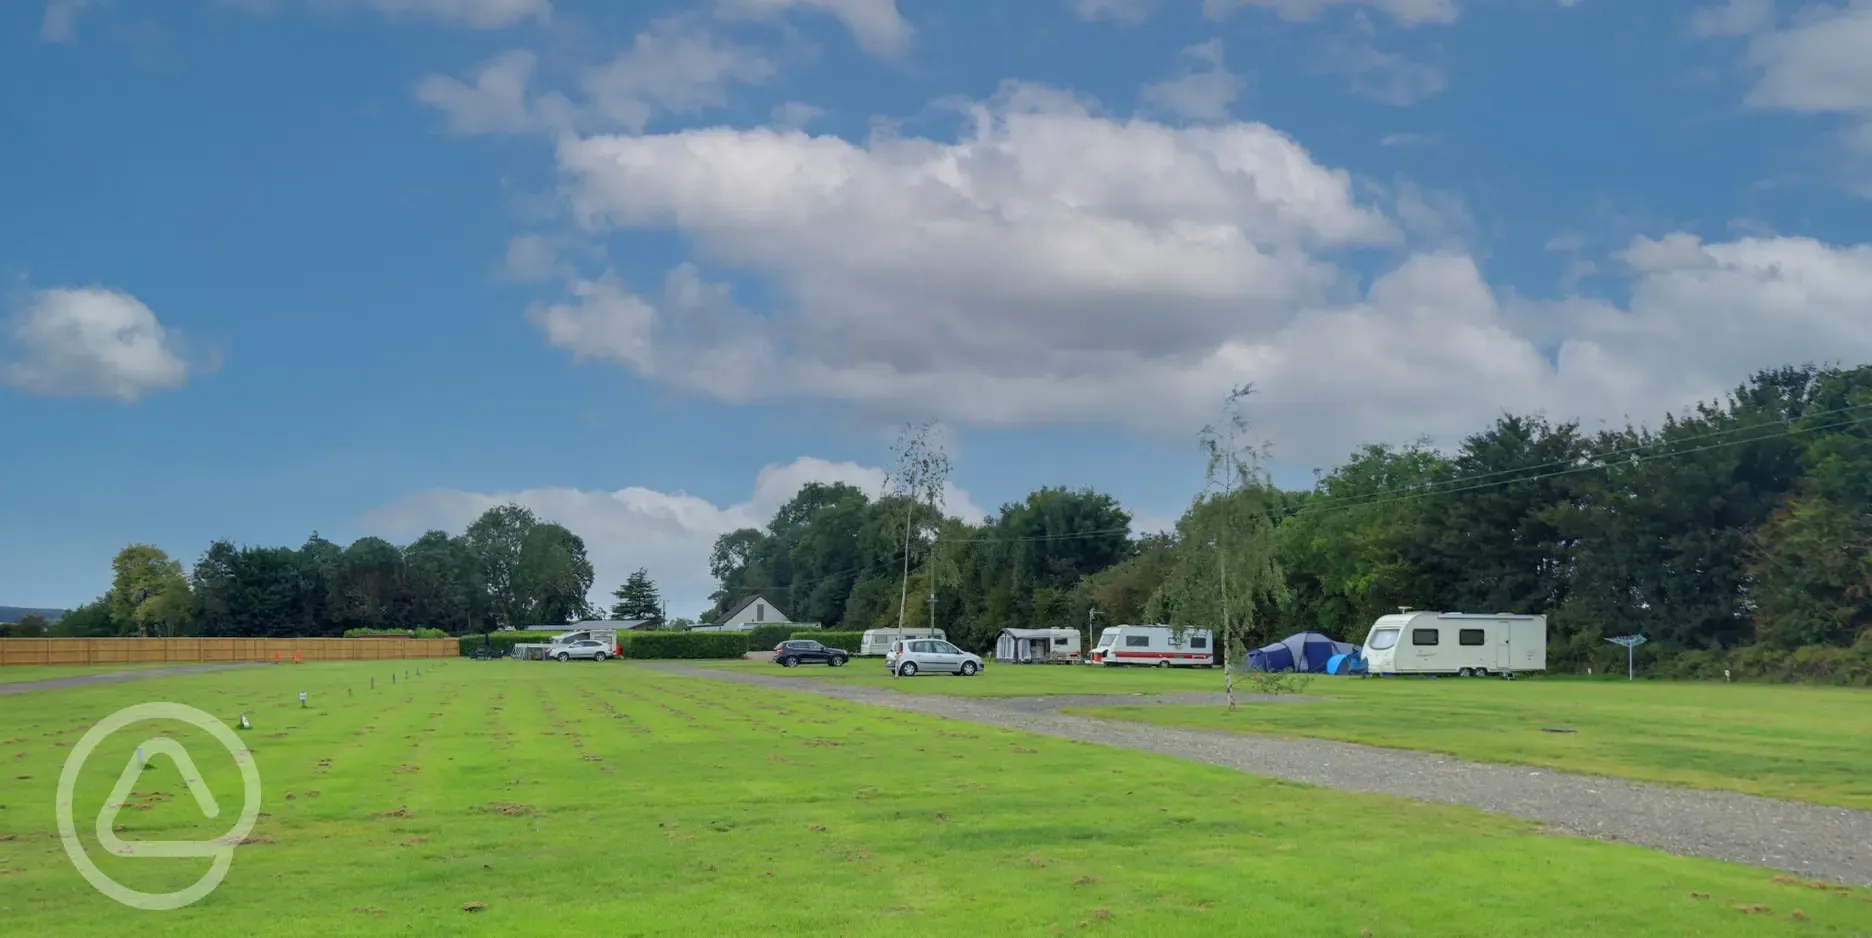 Camping overview